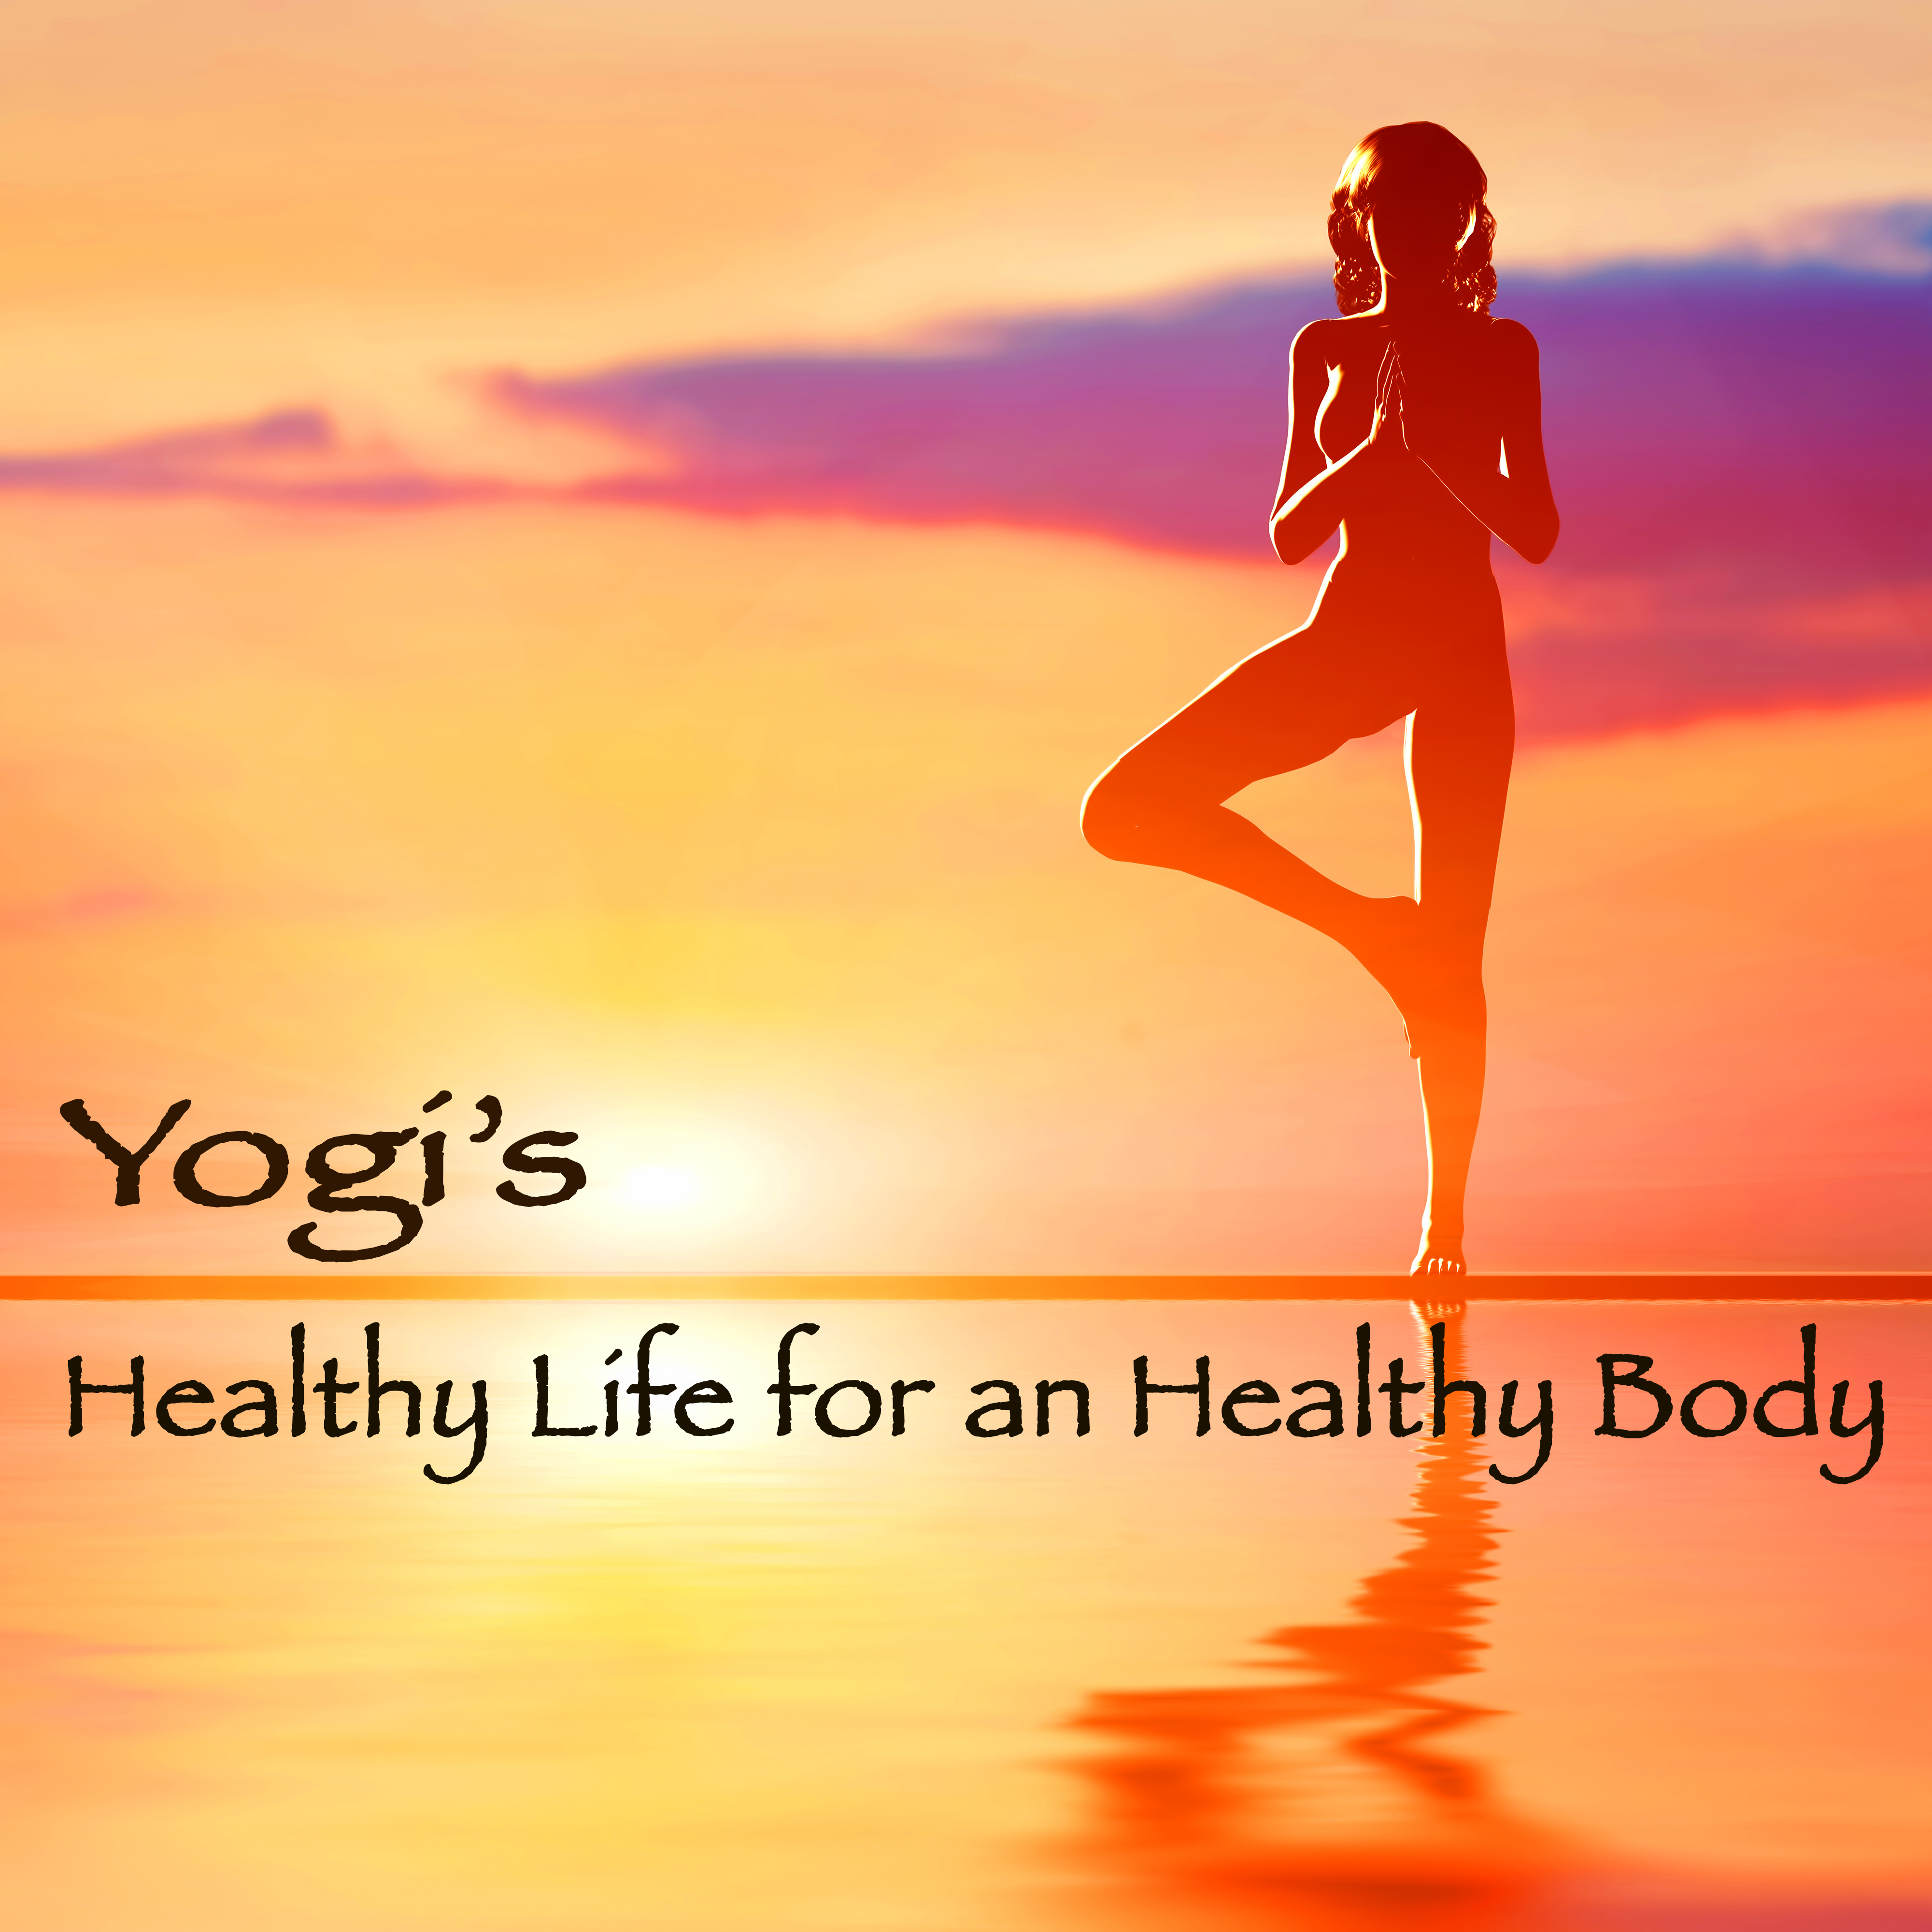 Yogi's Healthy Life for an Healthy Body – New Age Chillout Music for Asanas & Meditation in Yoga Space